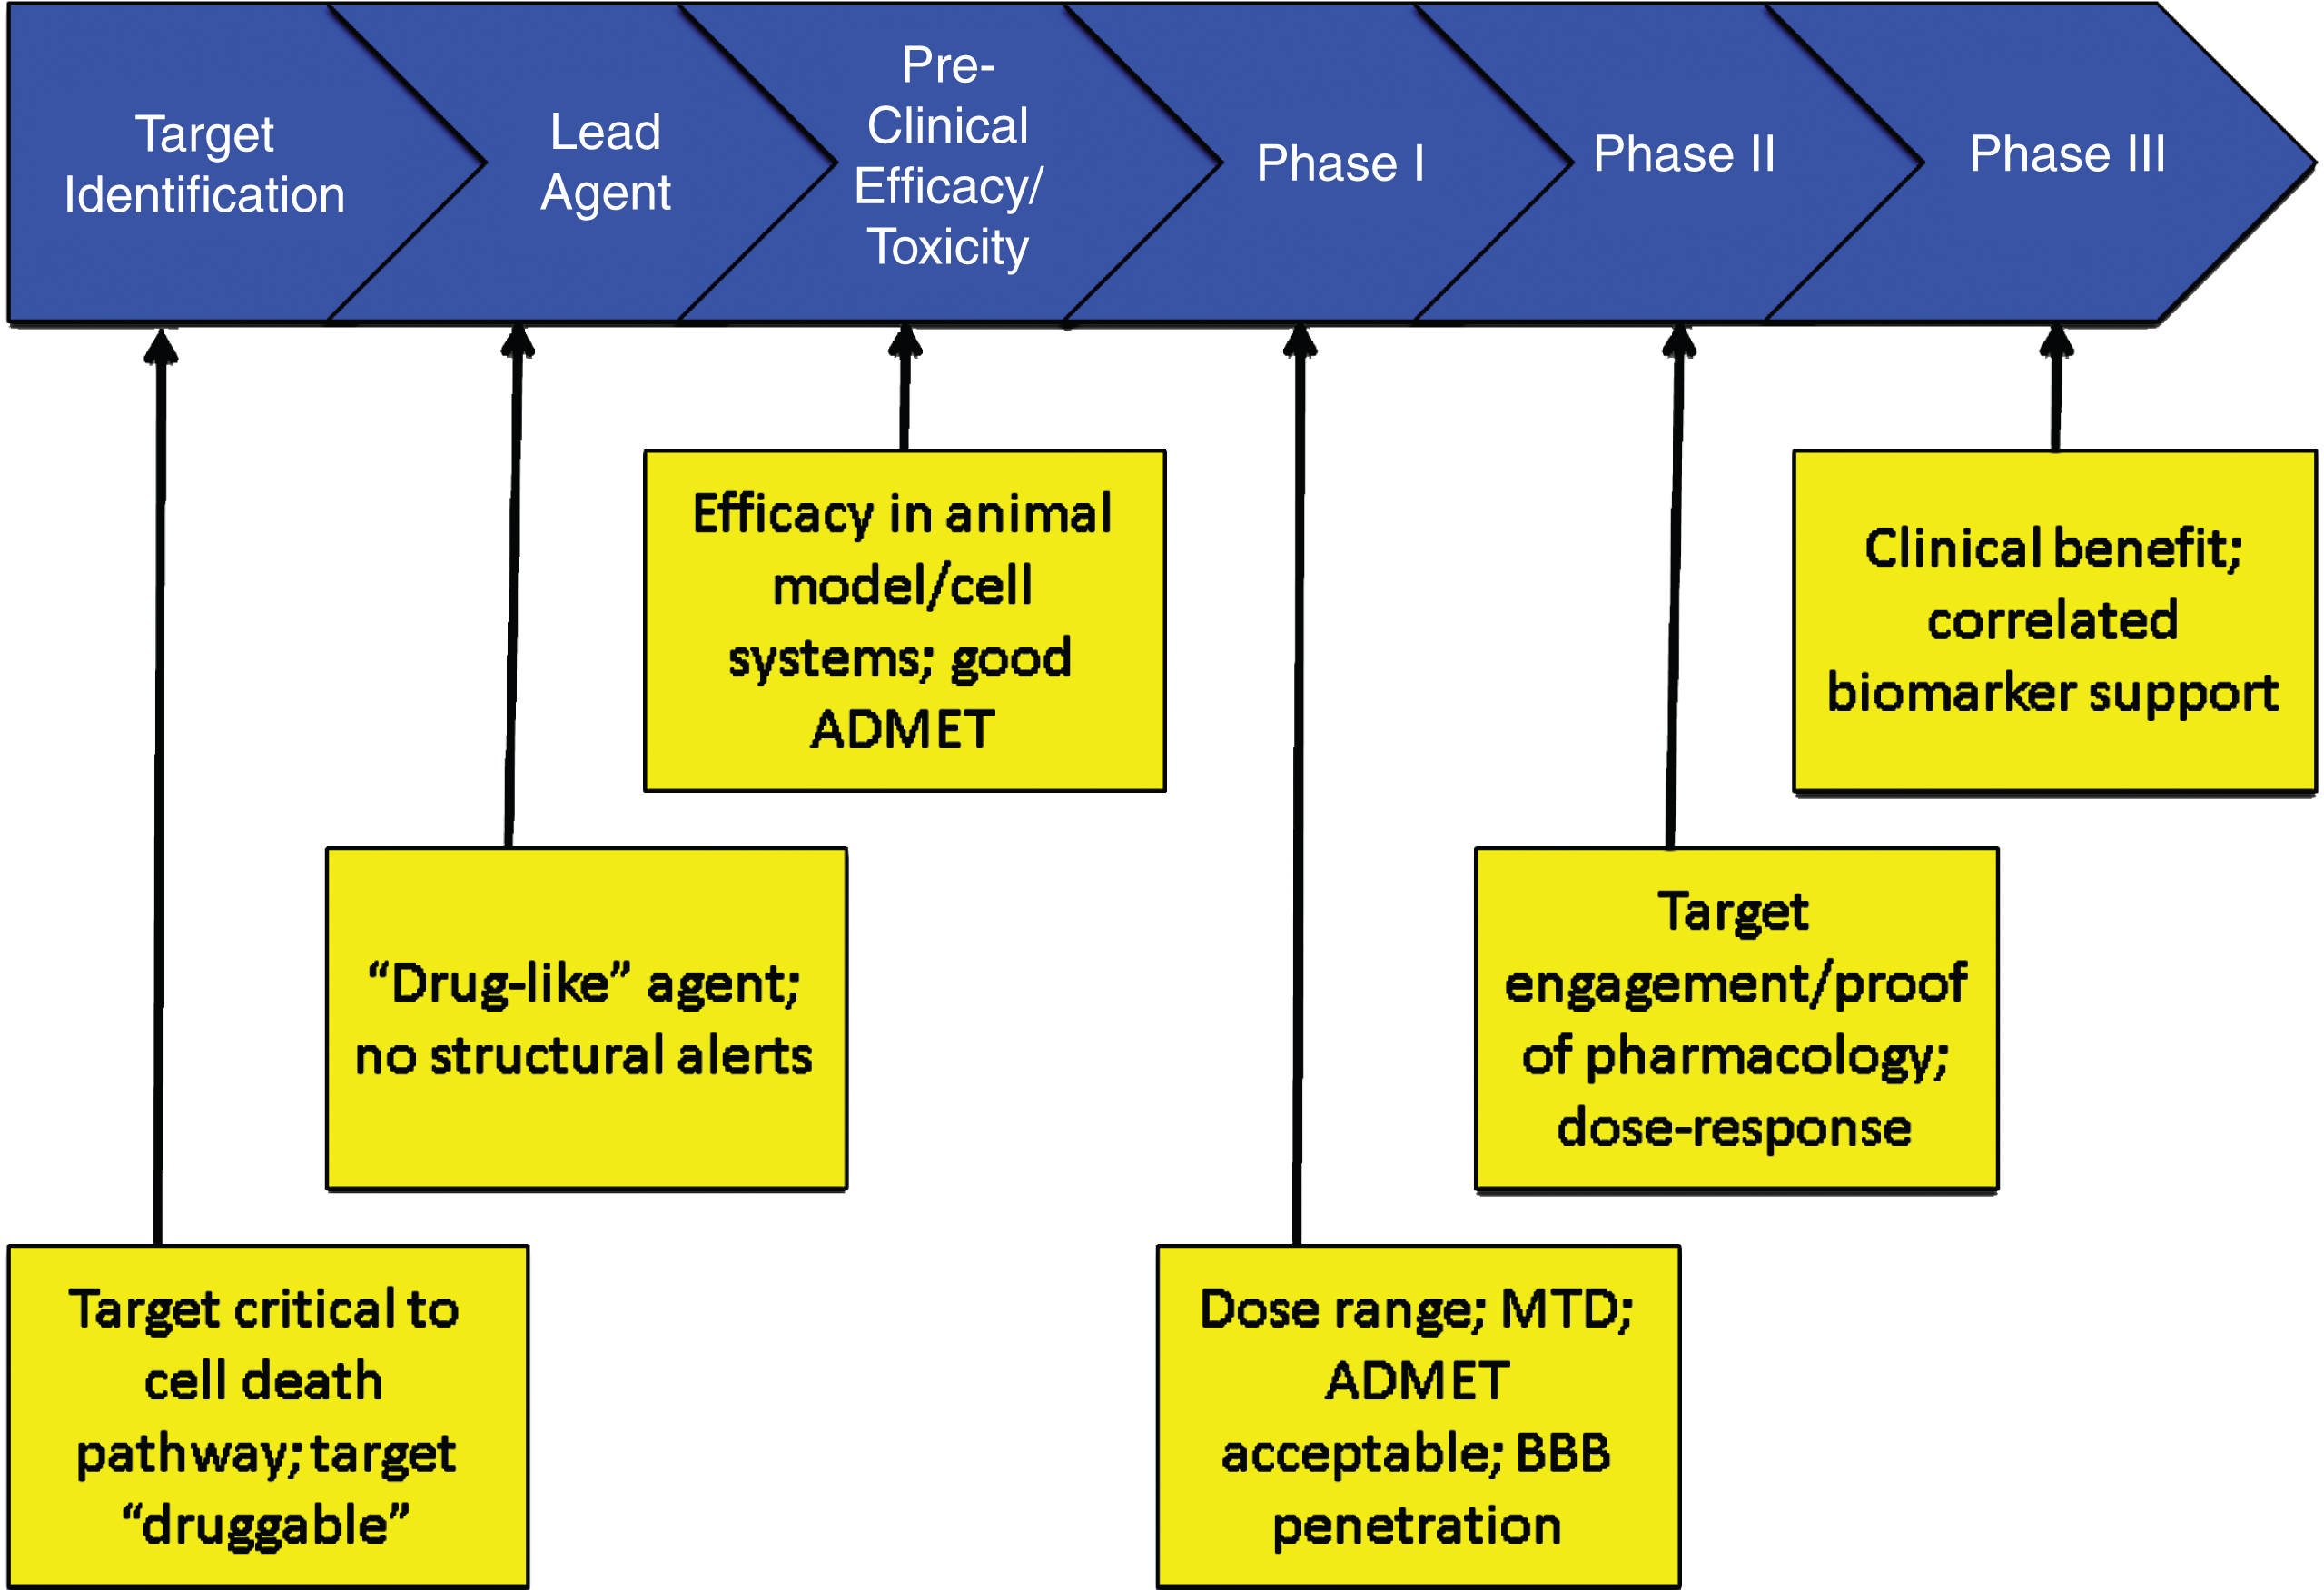 Critical data to be accrued in each stage of drug discovery and development (ADMET – absorption, distribution, metabolism, excretion, toxicity; BBB – blood brain barrier; MTD – maximum tolerated dose).